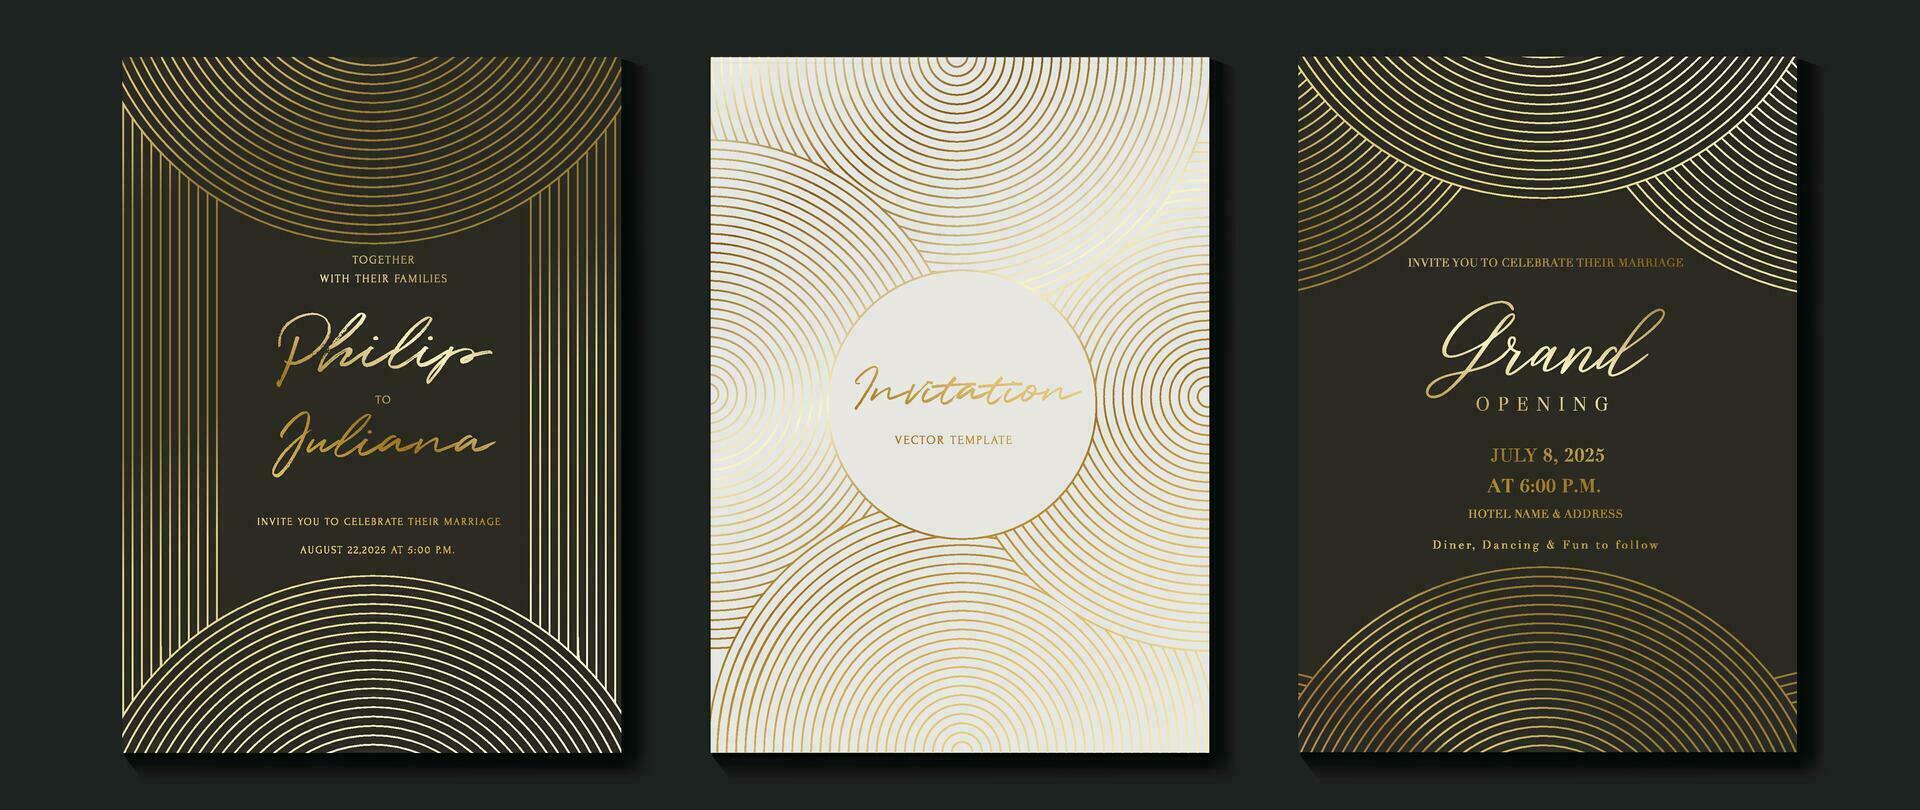 Luxury invitation card background vector. Golden elegant geometric pattern, gold line on dark and light background. Premium design illustration for wedding and vip cover template, grand opening, gala. vector